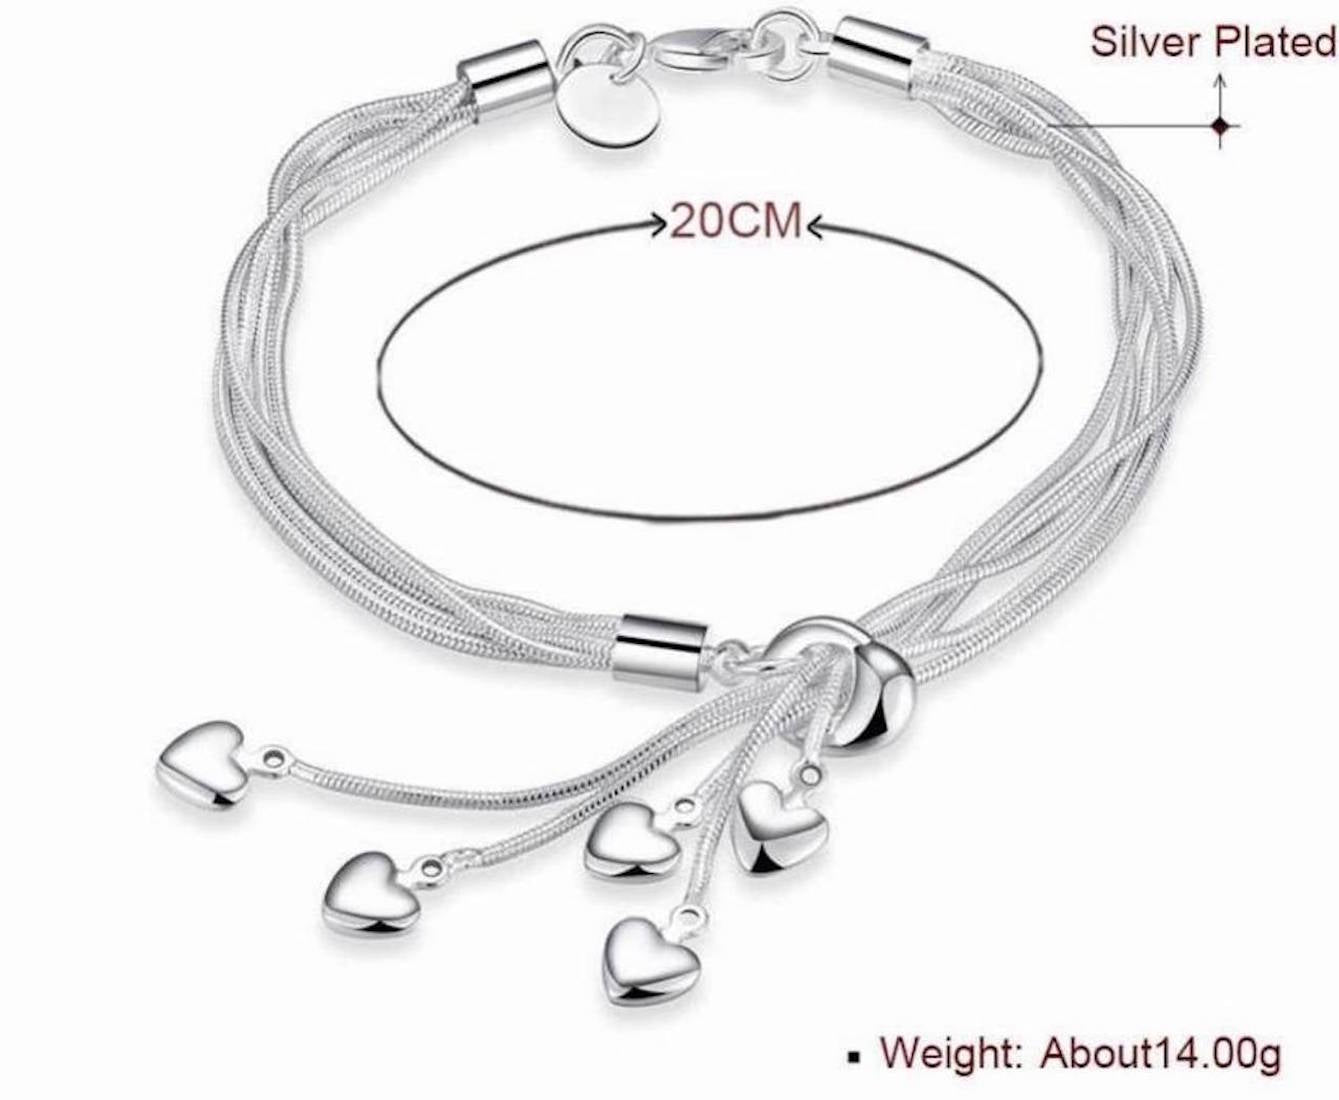 Silver plated bangles bracelet for women at ₹950 | Azilaa